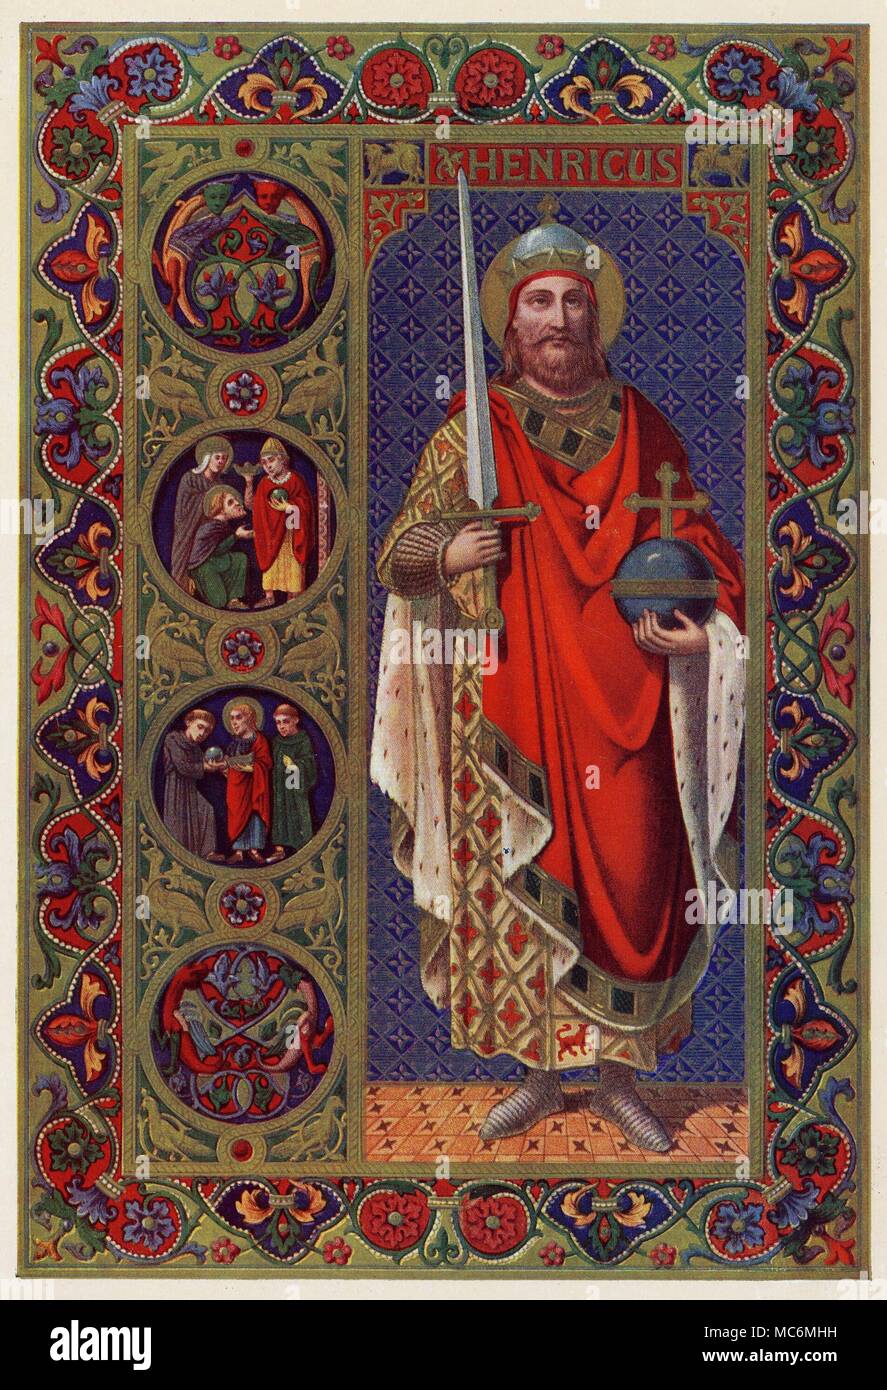 SAINTS - HENRY Saint Henry II, Holy Roman Emperor, surnamed 'the Pious' and 'the Lame', was born in 972, son of the Duke of Bavaria. He was crowned Pope in 1014, and afterwards built the cathedral and monastery at Bamburg. Process print, from Alban Butler's The Lives of The Fathers, Martyrs and Other Principles Saints, edition of circa 1928. Stock Photo